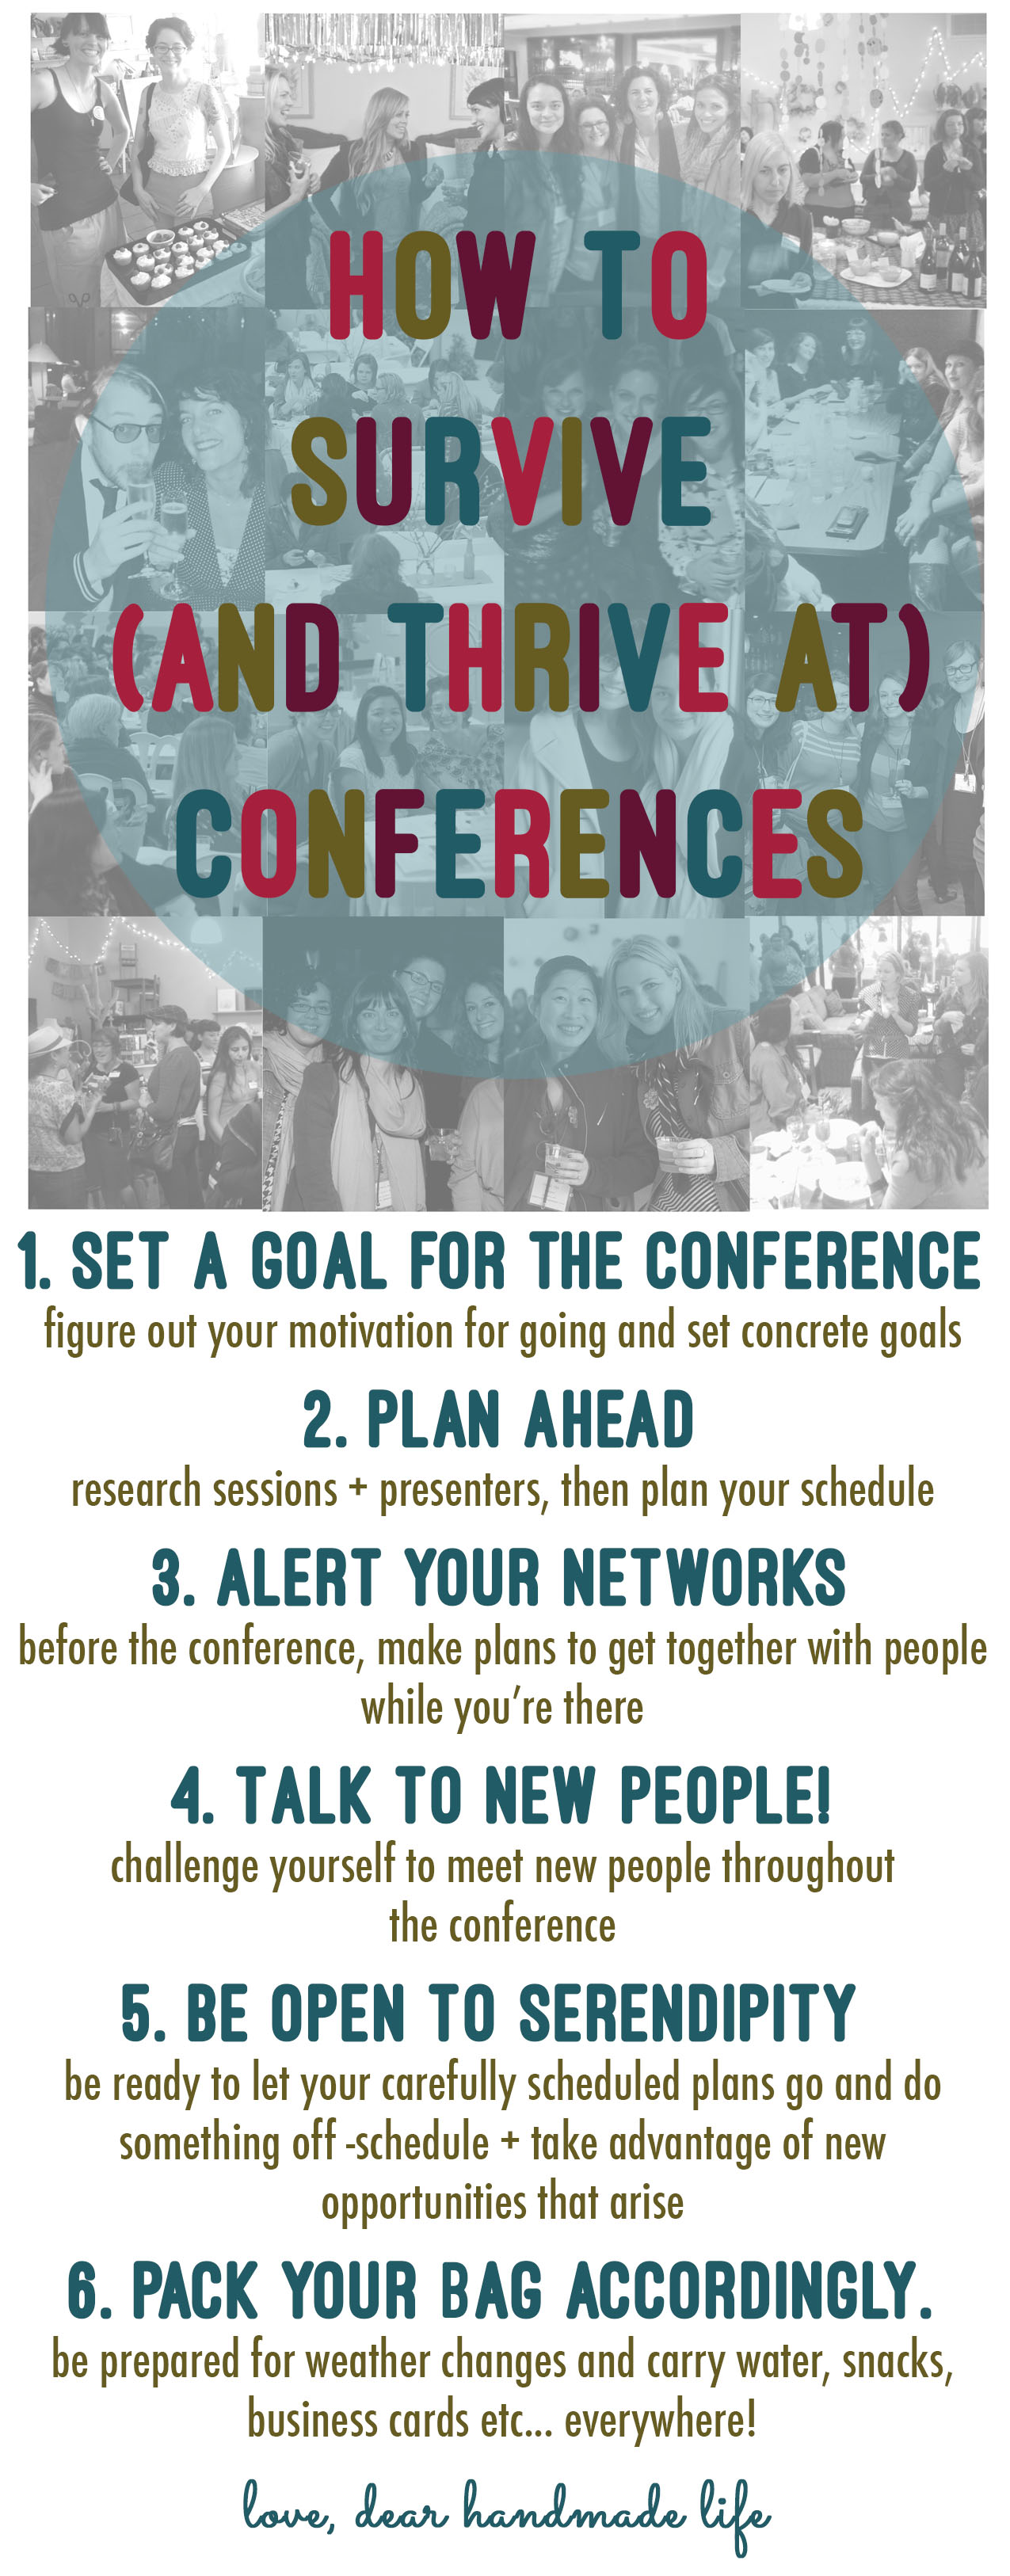 how-to-survive-and-thrive-at-conferences